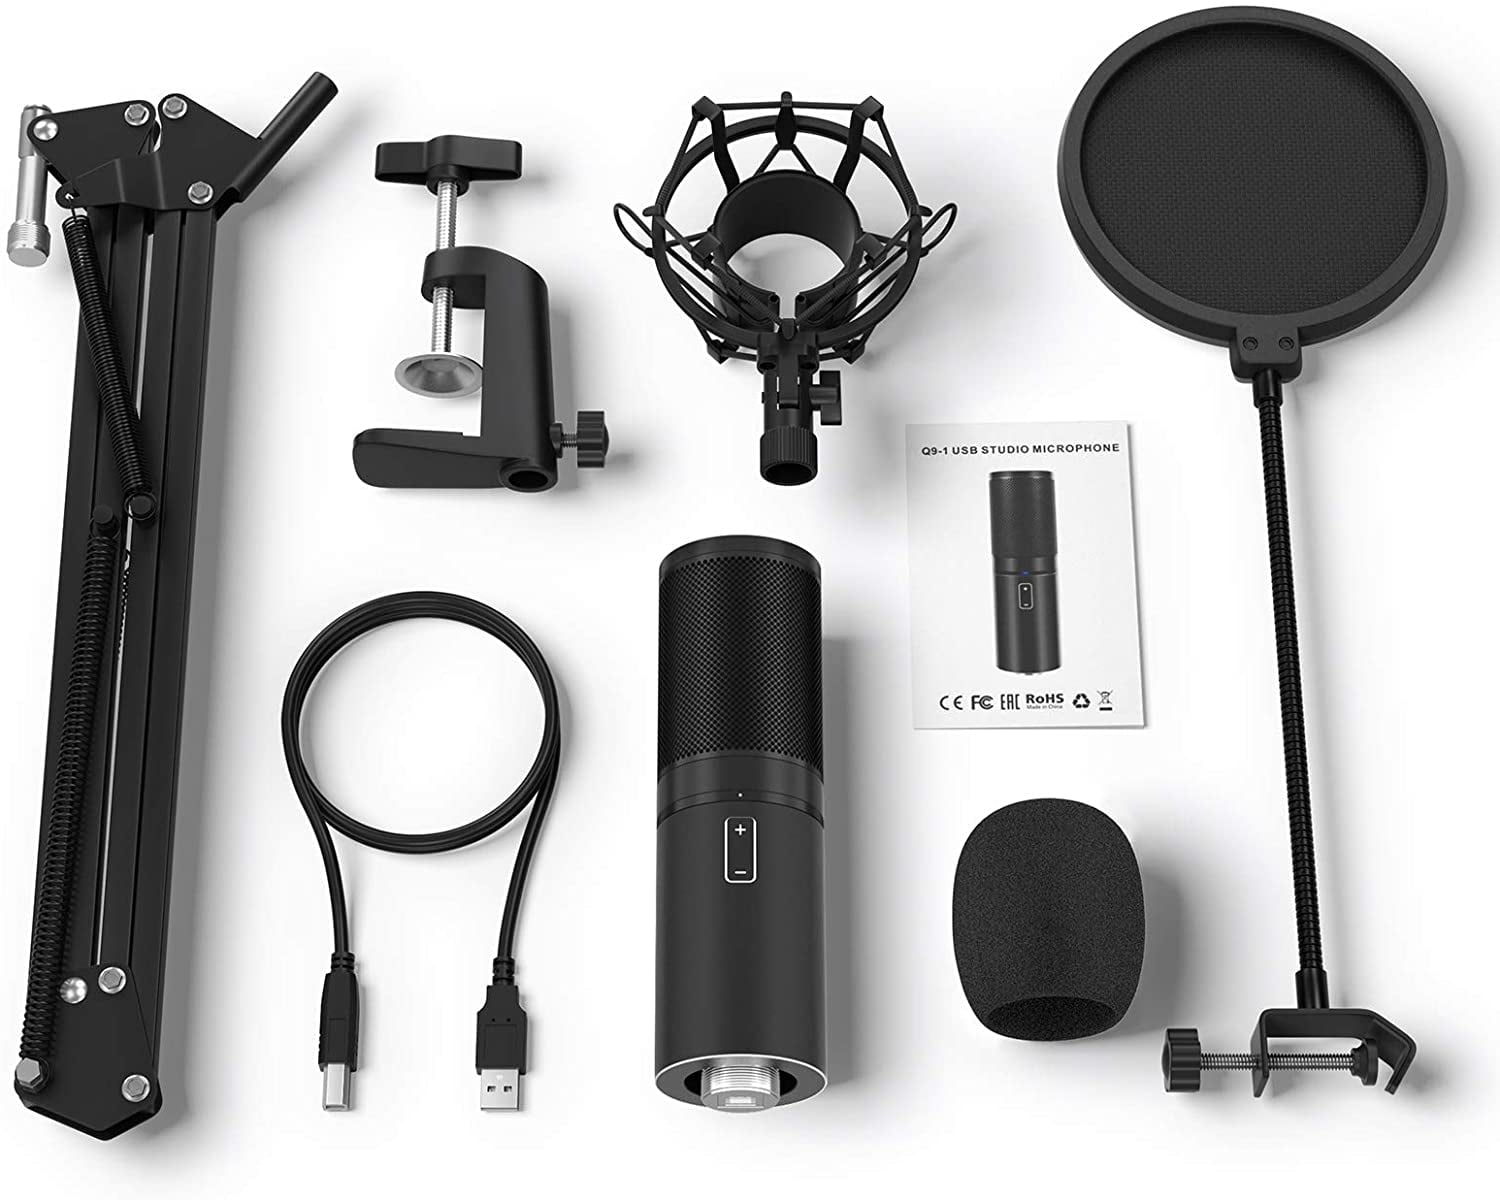 ELCM Microphone Kit USB Change Condenser Microphone Kit With Mic Pop Filter Suspension Boom Scissor Arm for Computer Gaming Streaming YouTube Tutorials Voiceover Tutorials Podcast